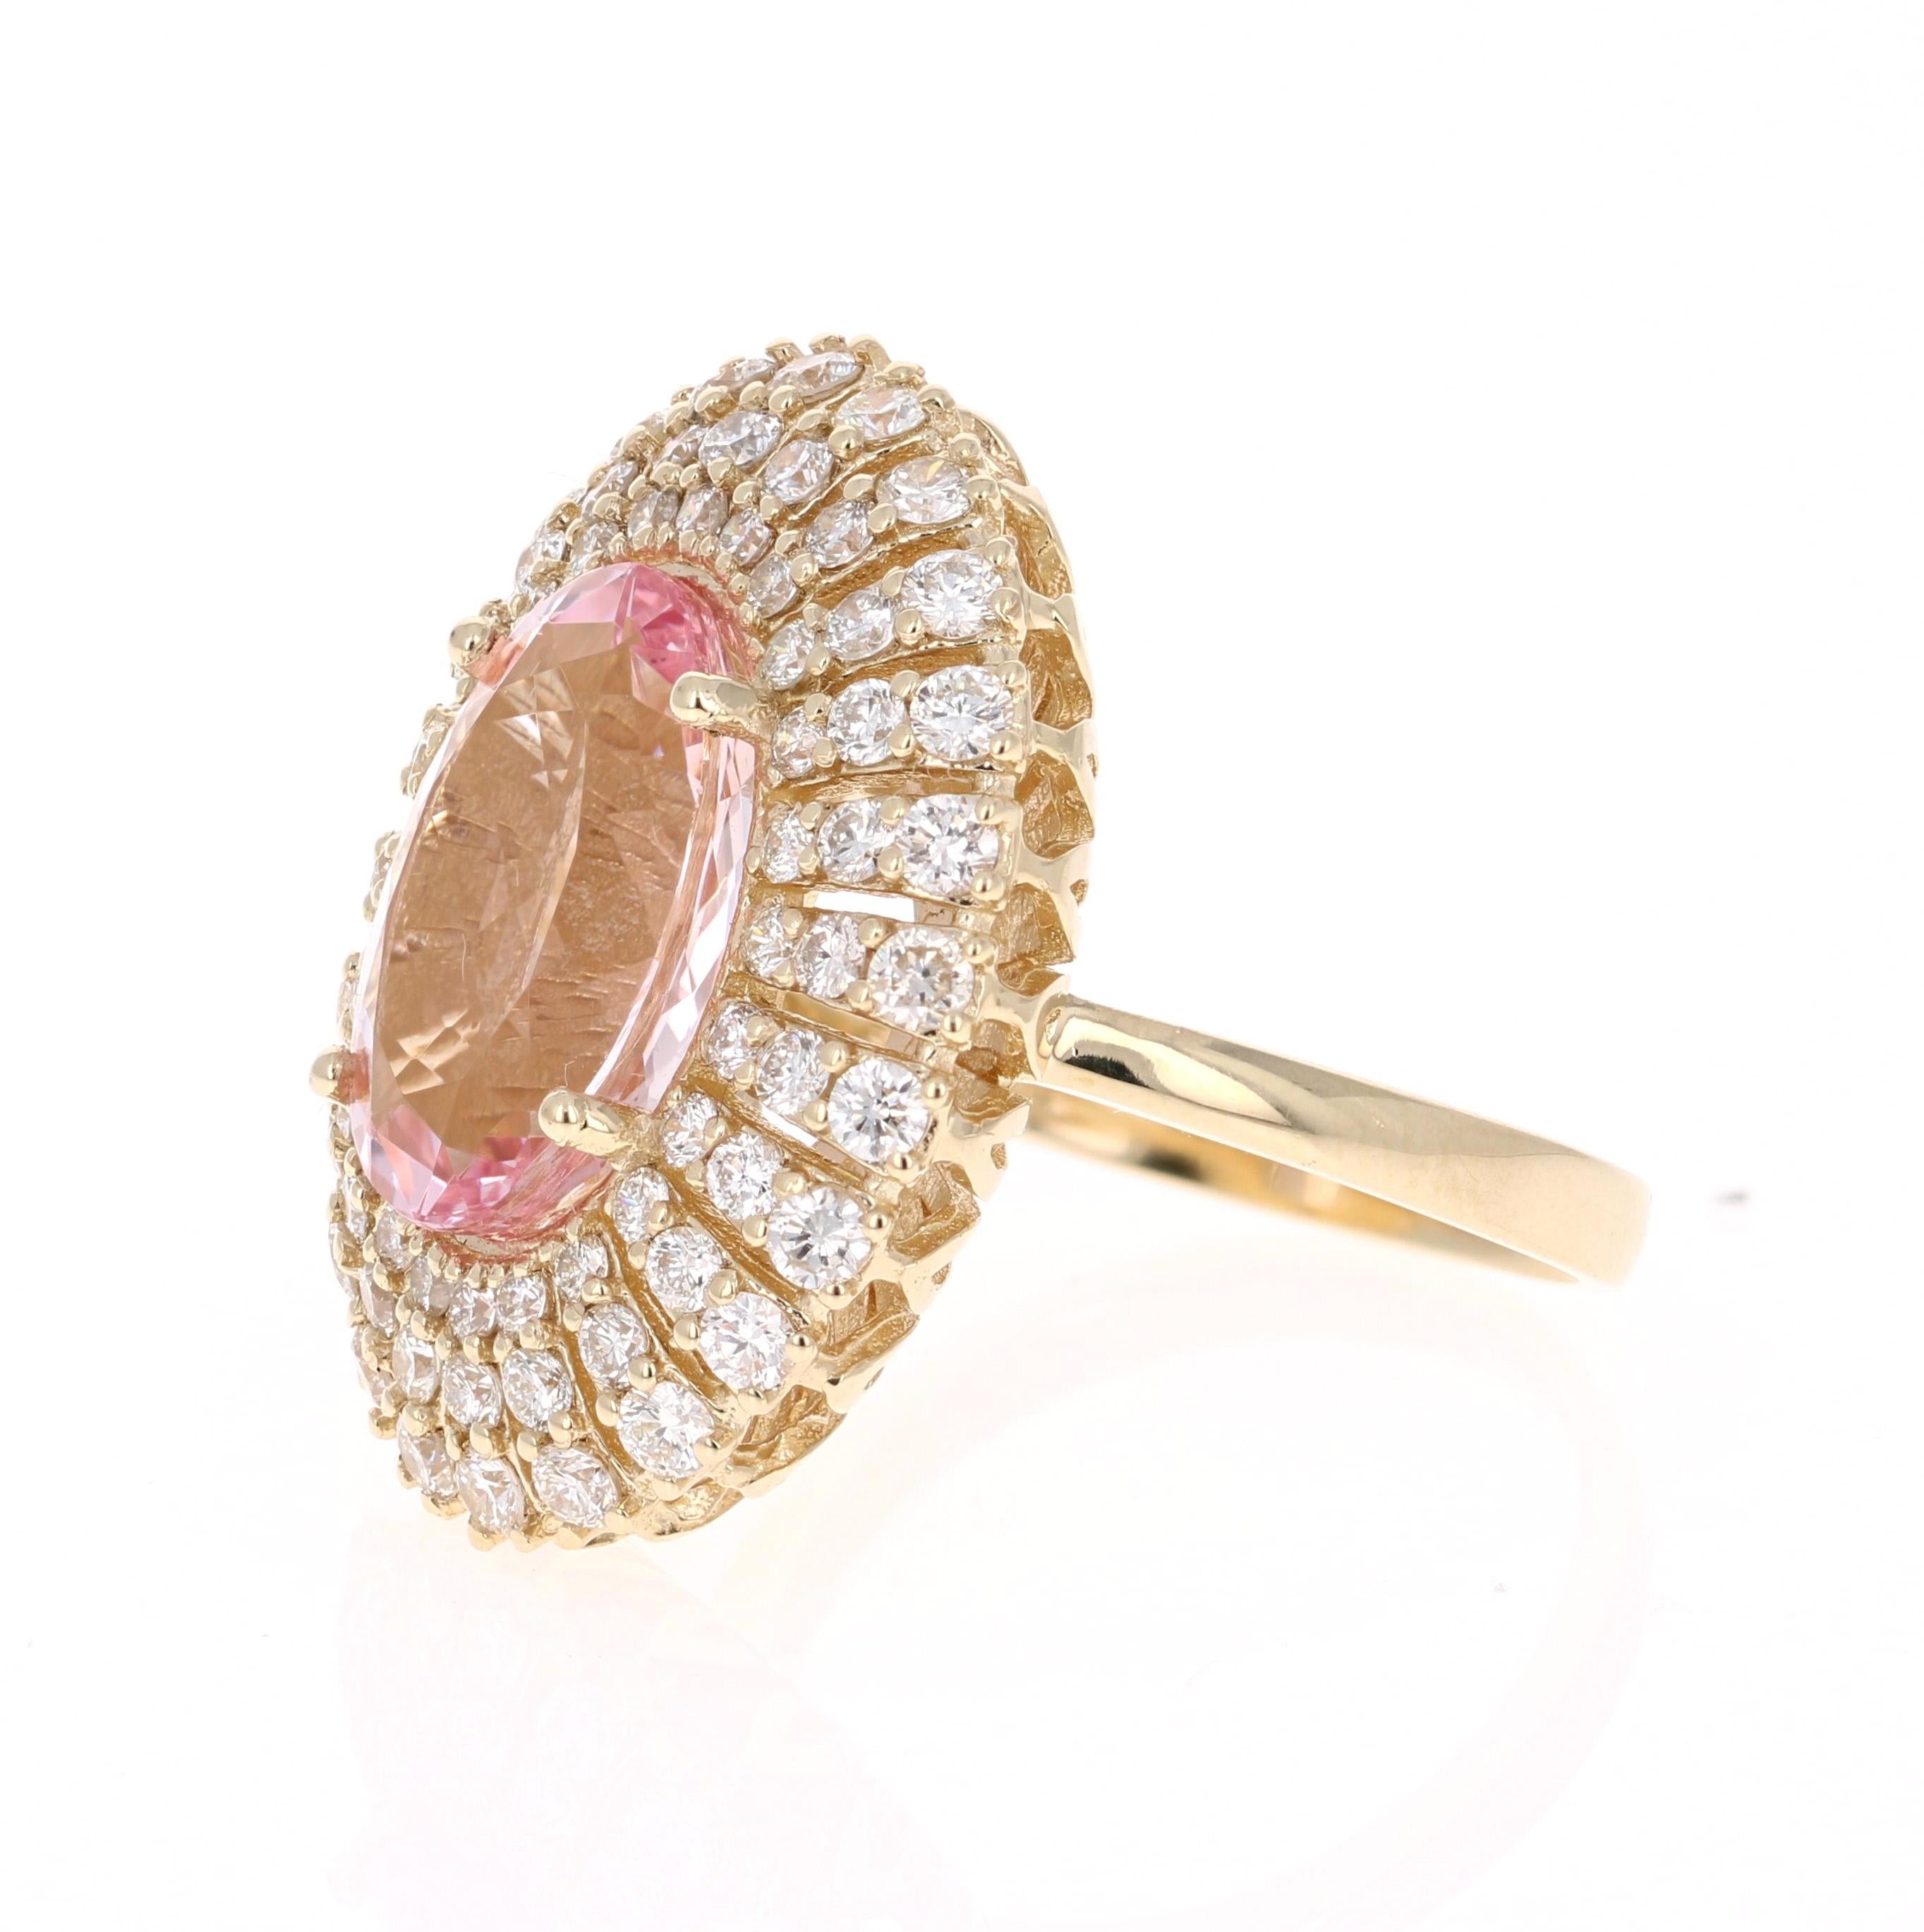 This gorgeous and classy Morganite Cocktail ring has a 5.50 Carat Oval Cut Pink Morganite and has 72 Round Cut Diamonds that weigh 1.74 Carats. The total carat weight of the ring is 7.24 Carats.  

It is set in 14K Yellow Gold and weighs